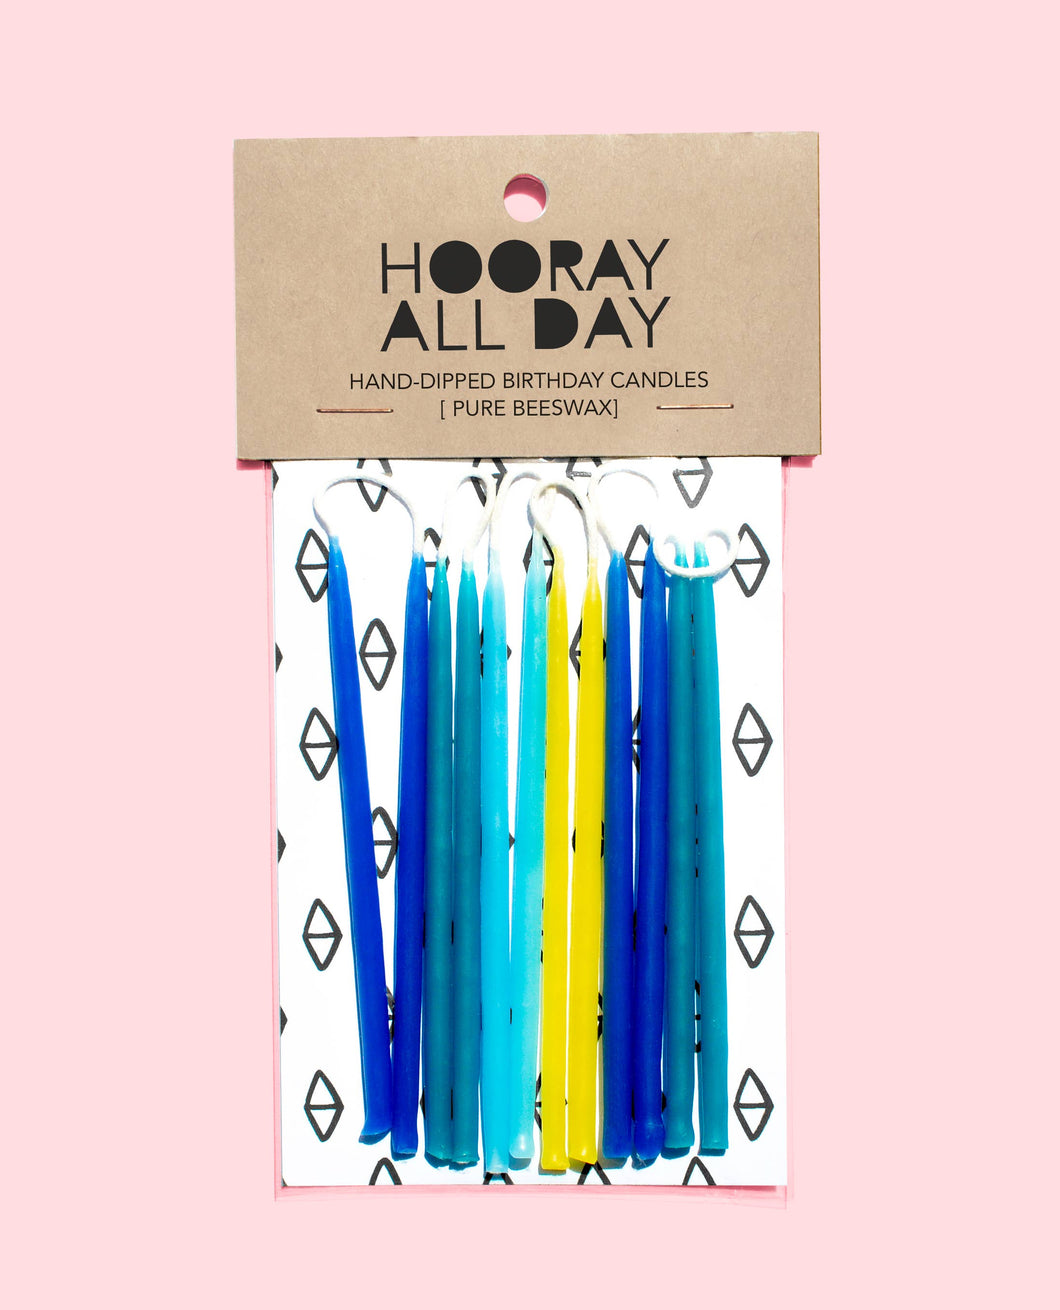 Birthday Candles - Blues Hand-Dipped Beeswax